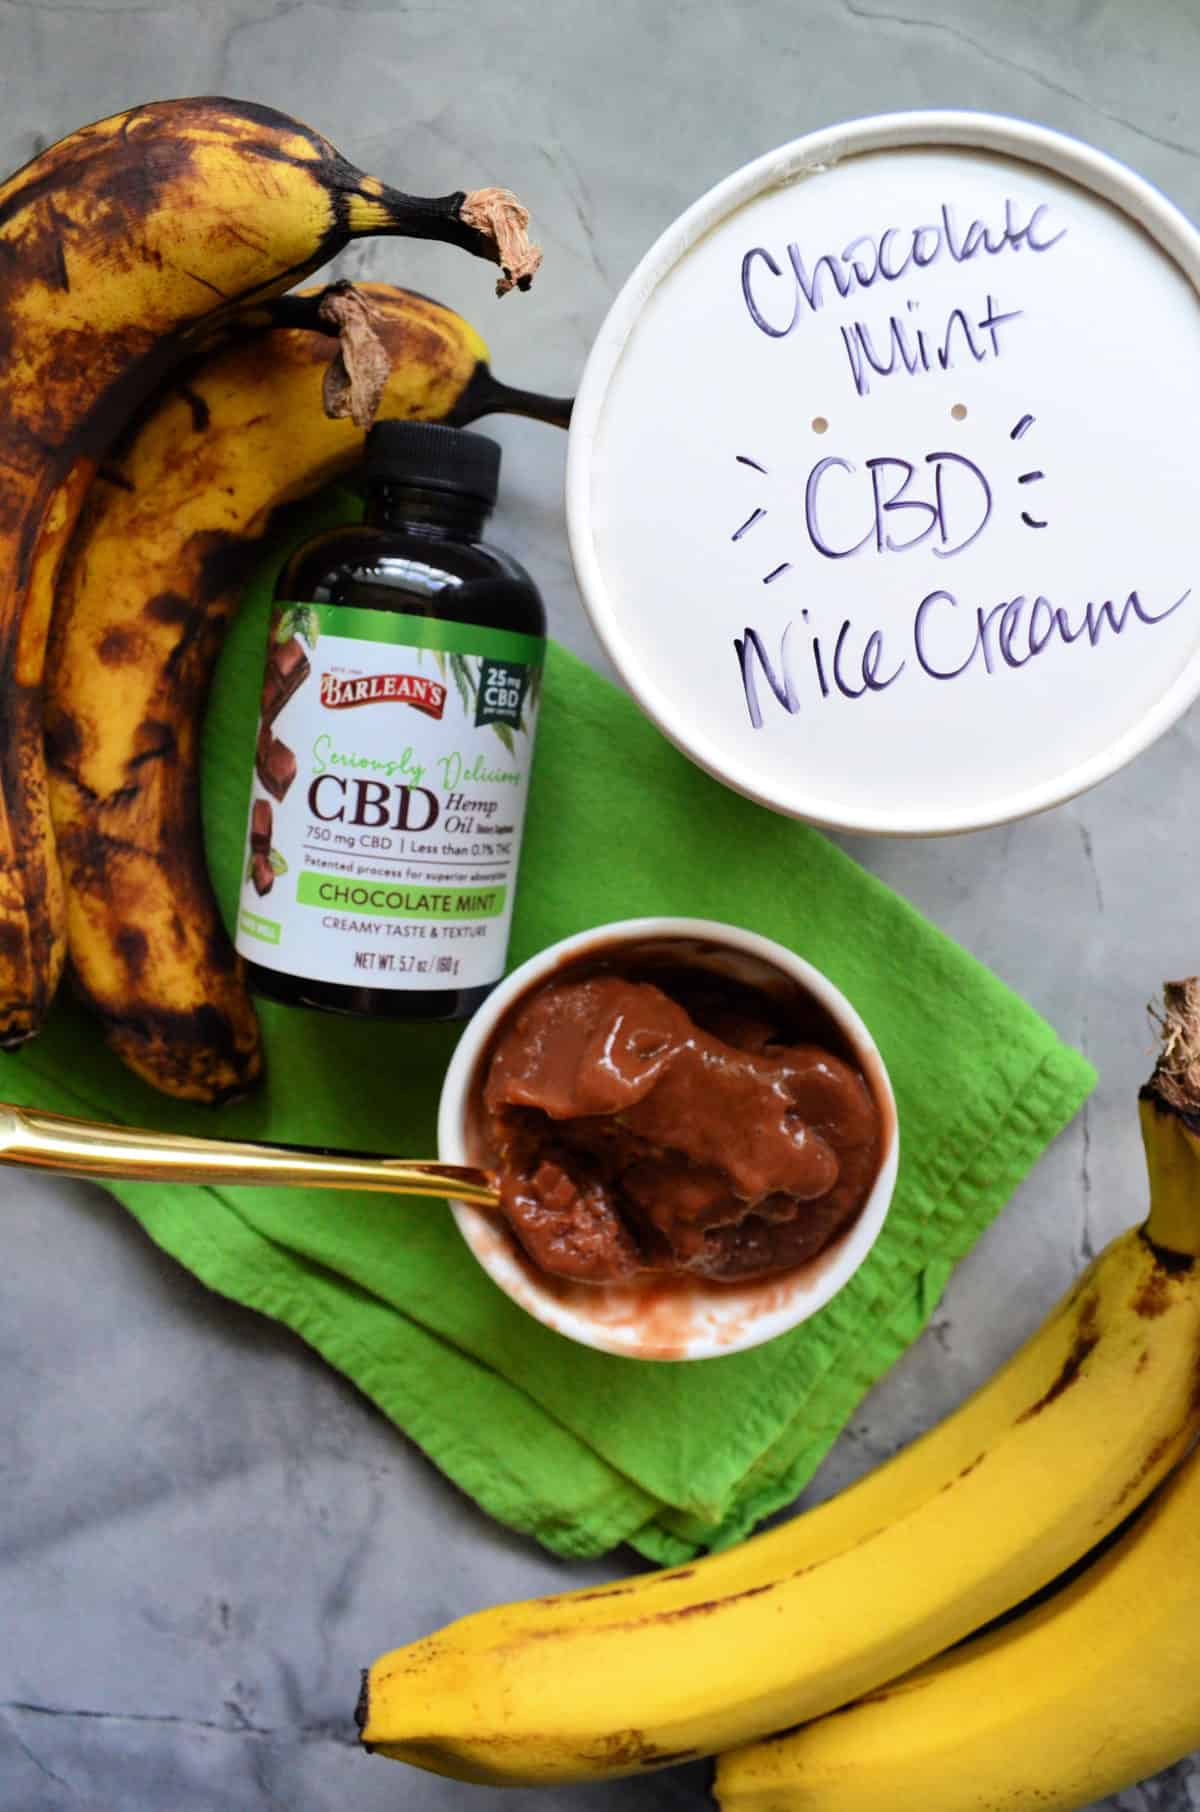 top view bowl of chocolate ice cream with spoon next to bananas, CBD oil bottle, and labeled pint.